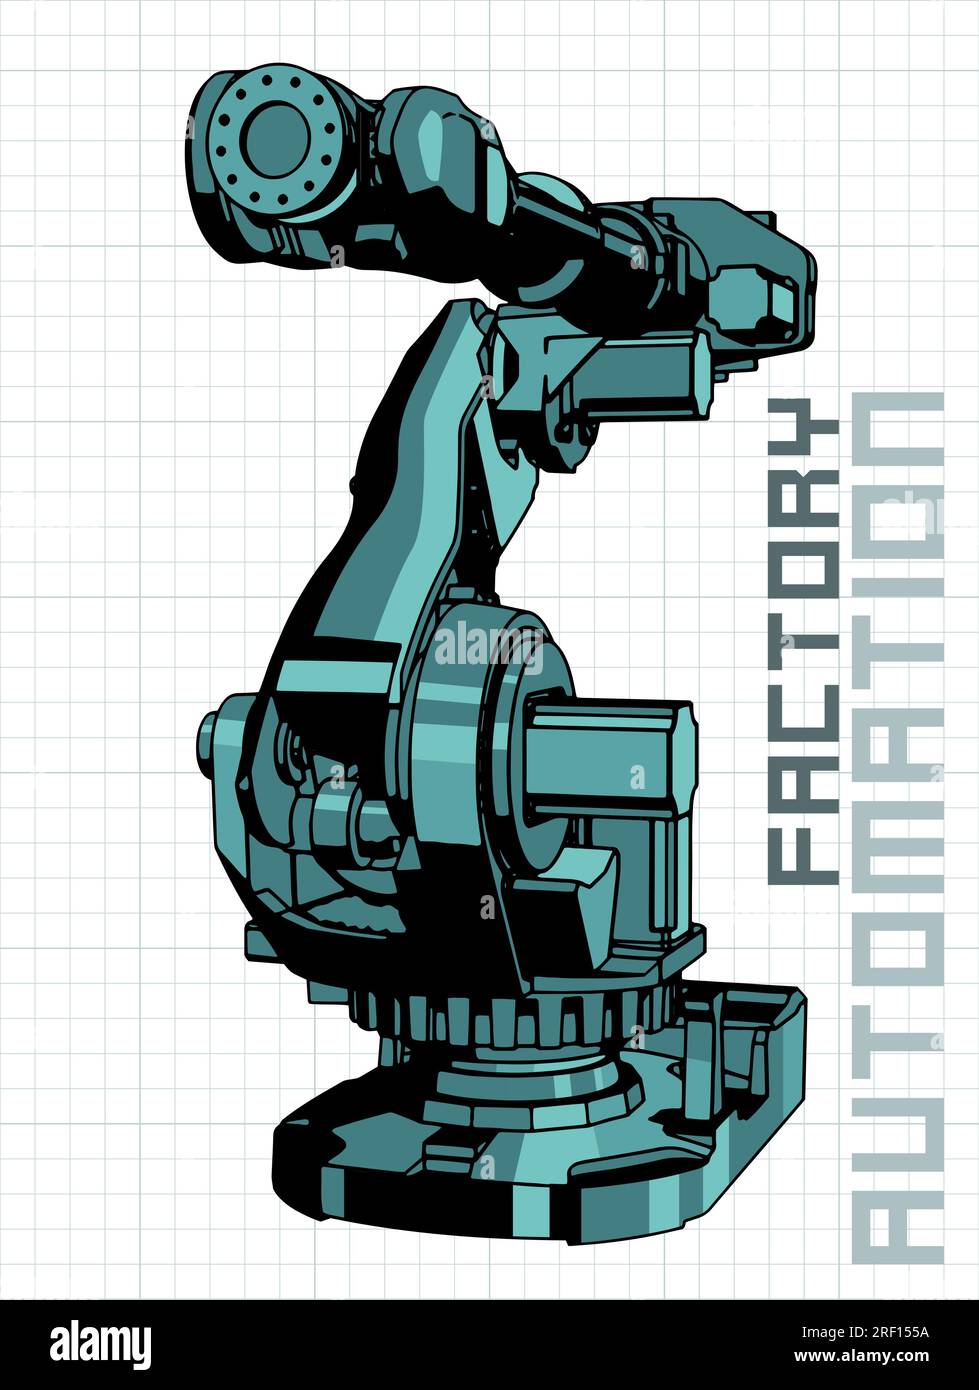 Stylized vector illustration of industrial robotic arm for automated production Stock Vector